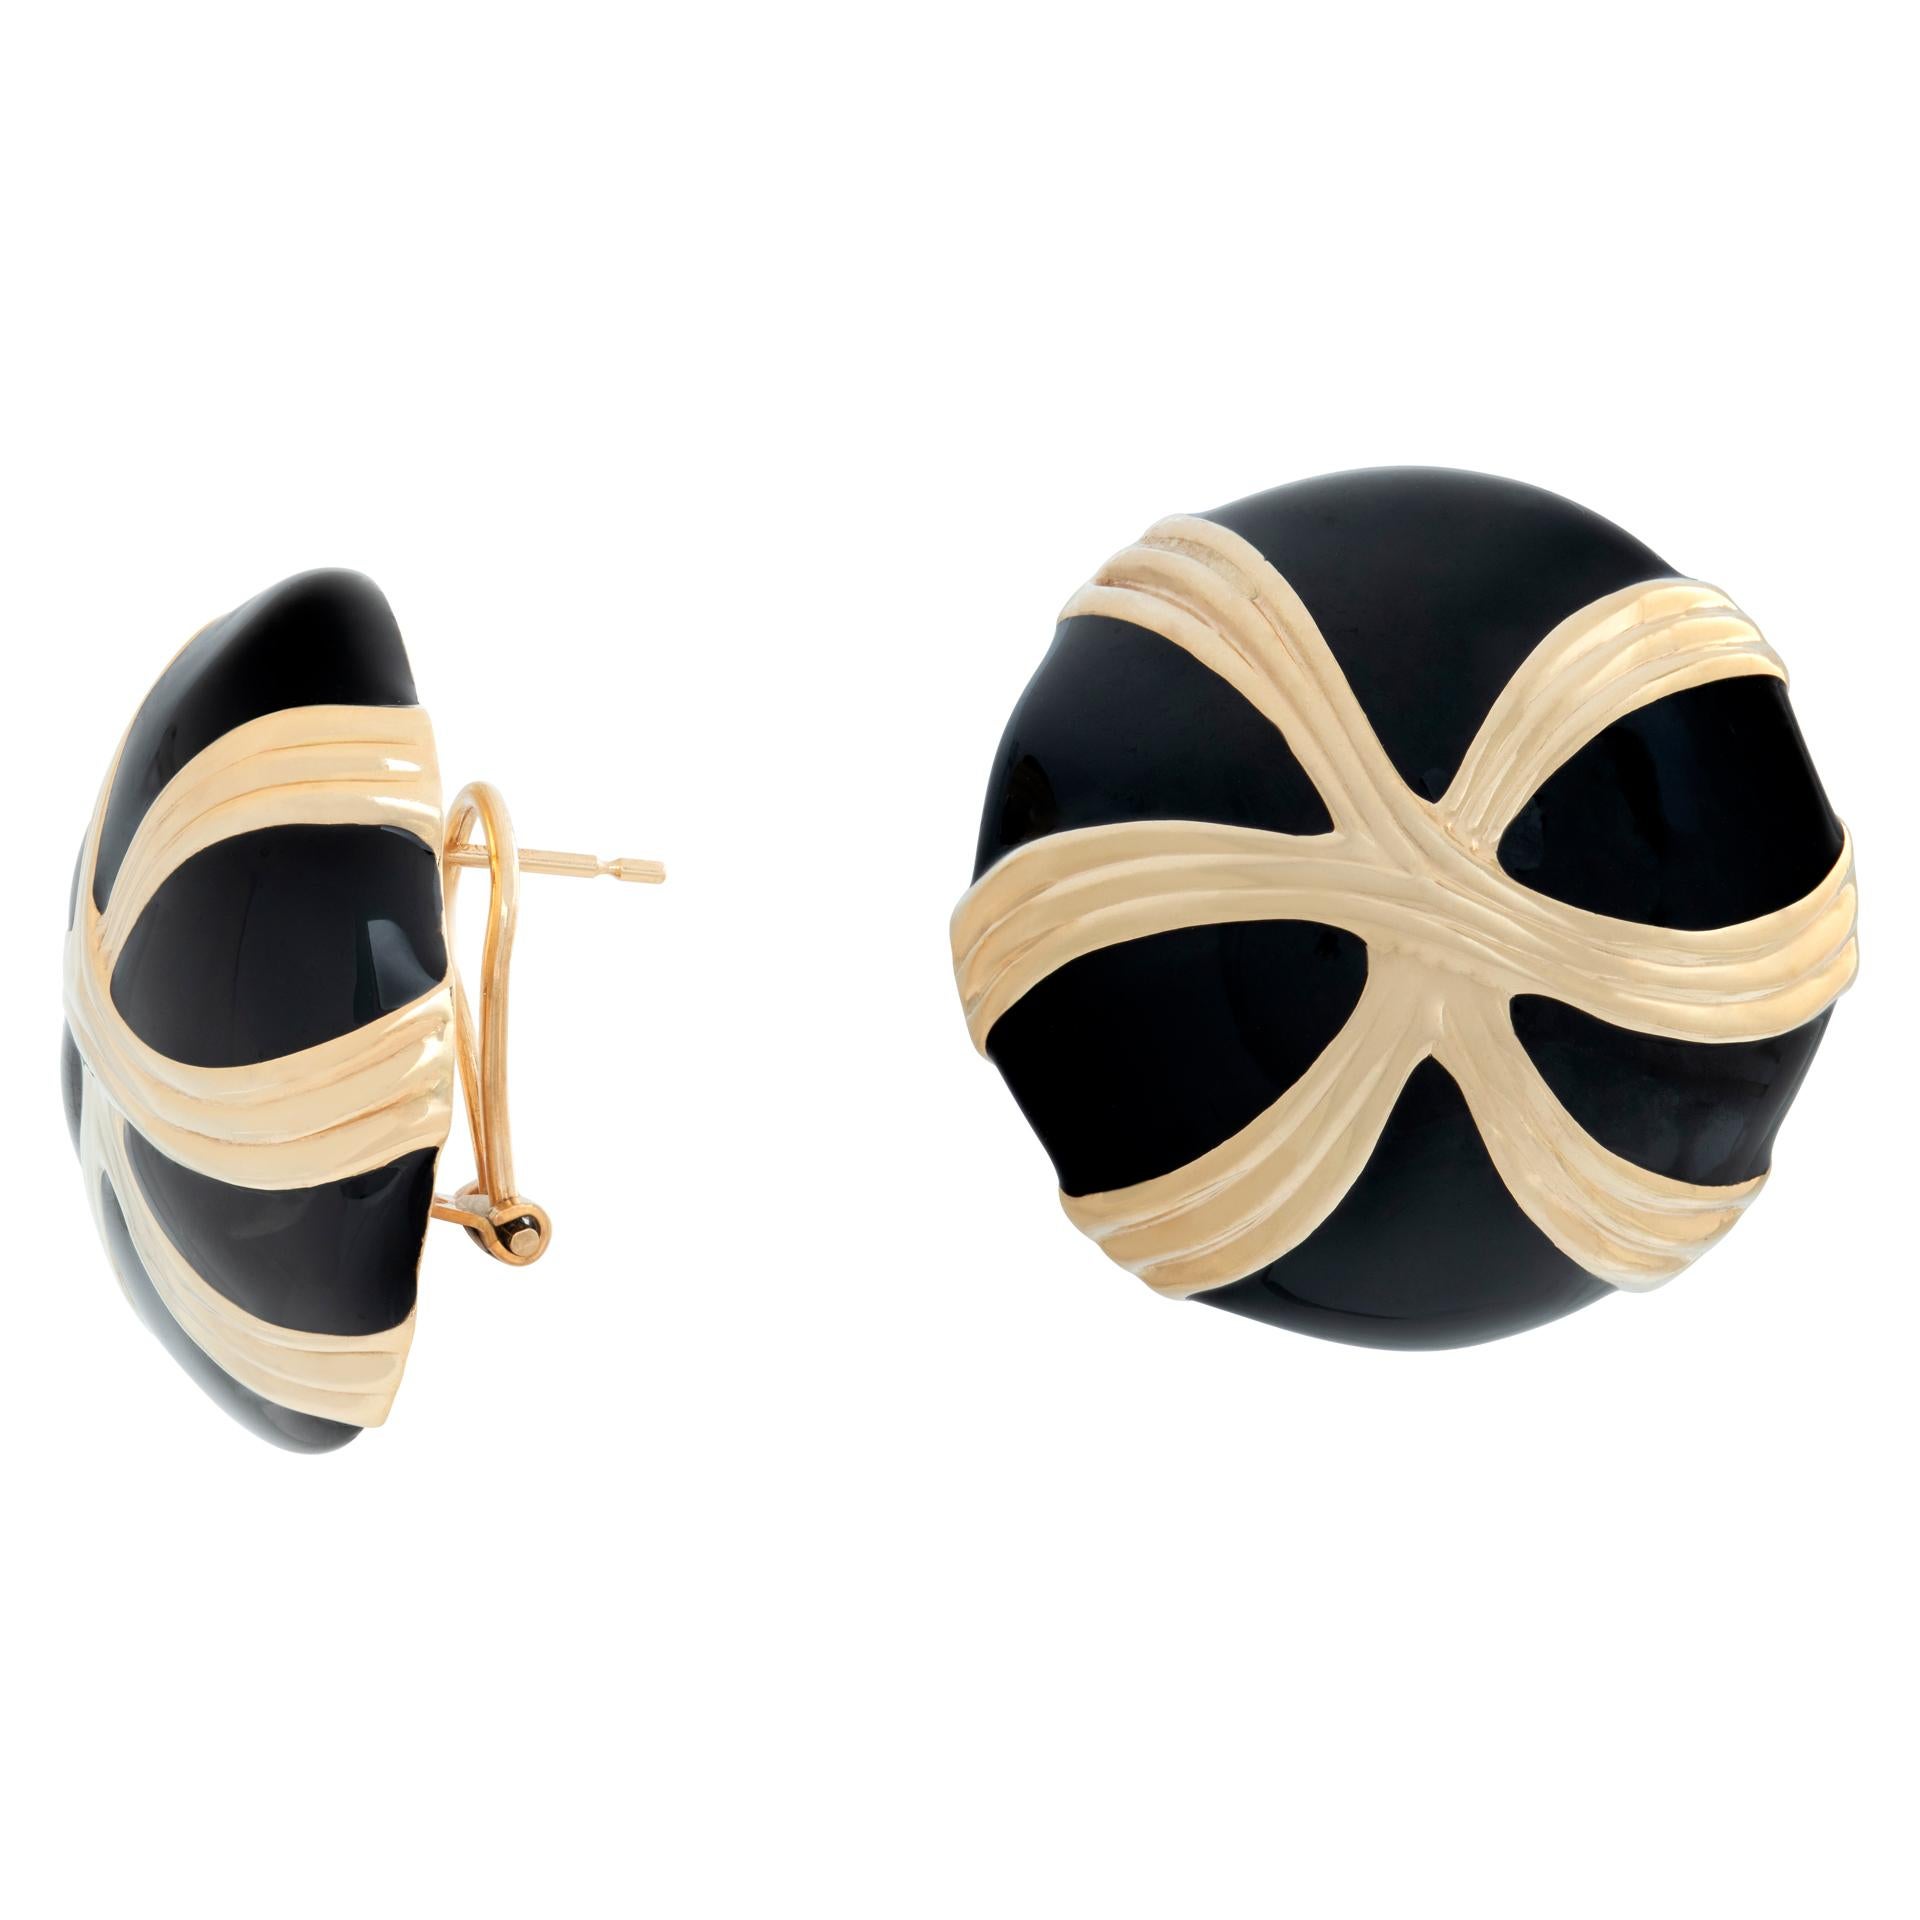 Black enamel and 14k yellow gold domed circle earrings with omega clip posts. Measures 30mm x 30mm.